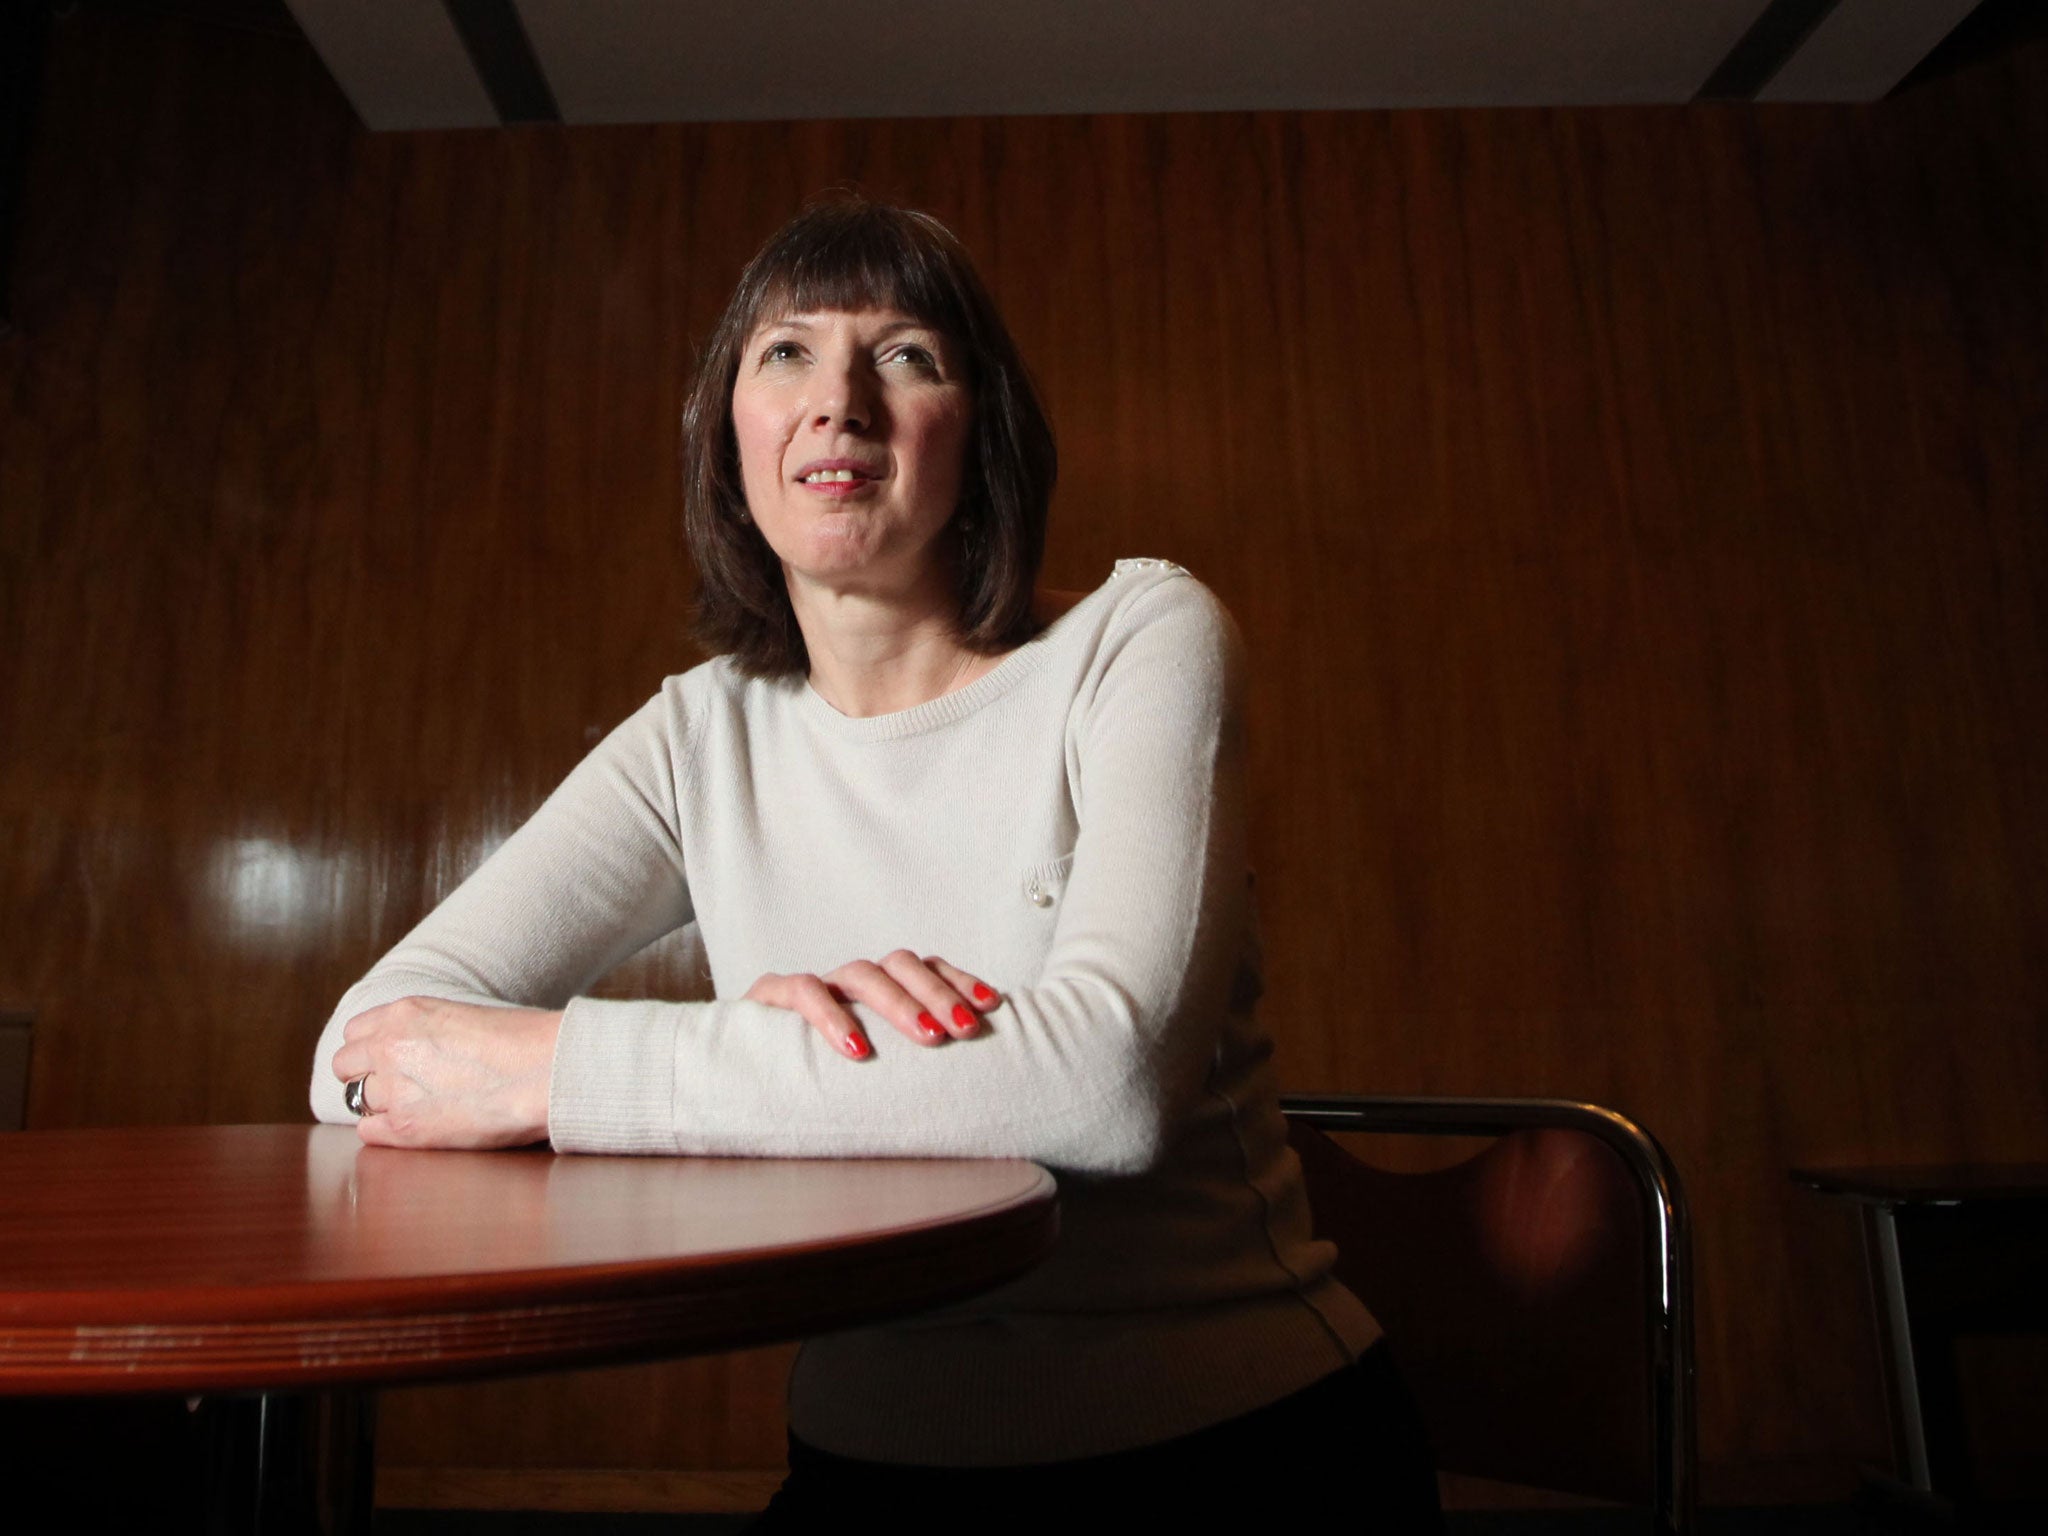 Frances O’Grady is set to become the first woman head of the TUC